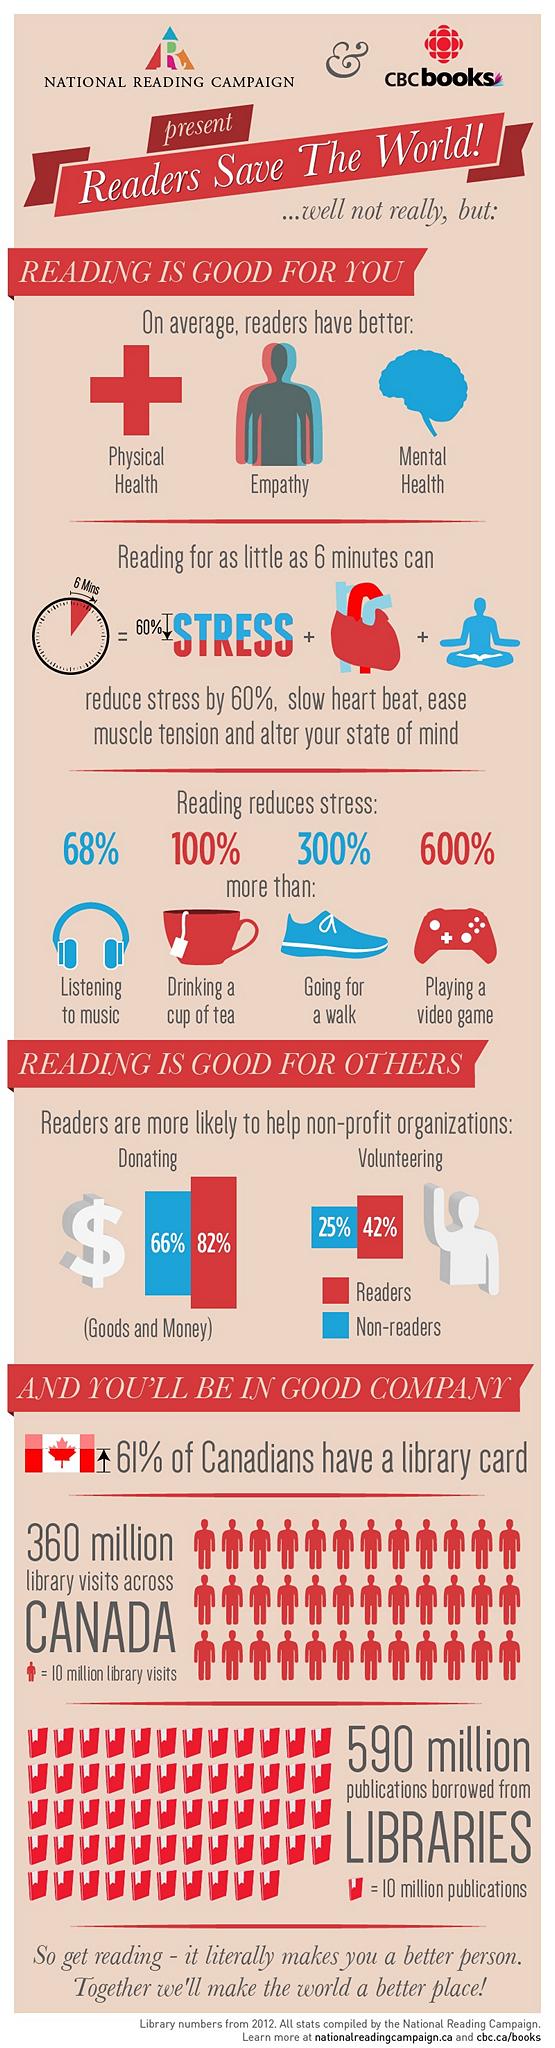 Why-reading-is-good-for-you-infographic